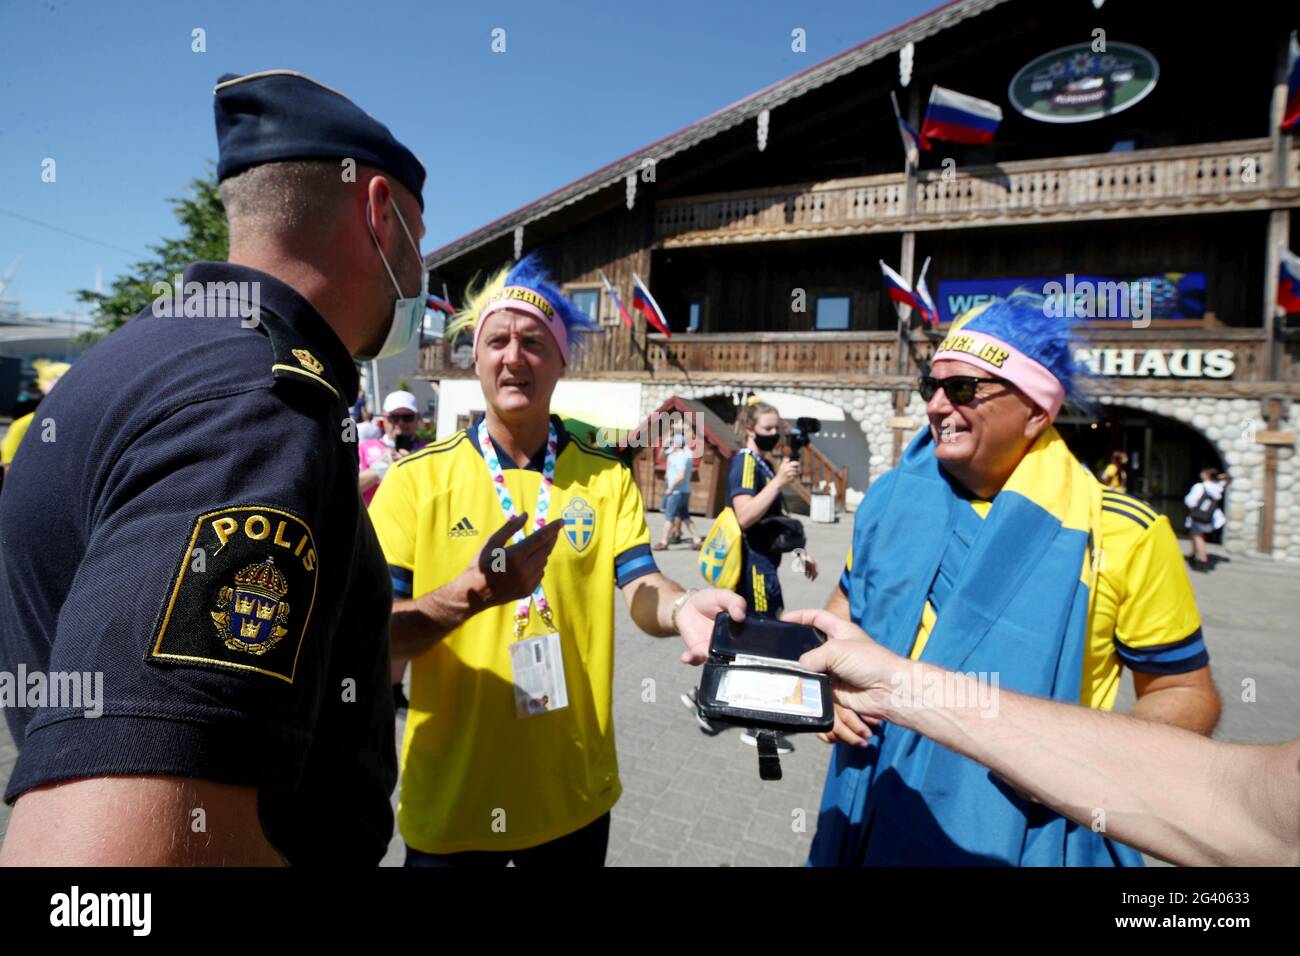 St Petersburg, Russia. 18th June, 2021. Swedish police officer and  supporters of the Swedish national football team cheer ahead of a UEFA Euro  2020 group stage match between Slovakia and Sweden, outside